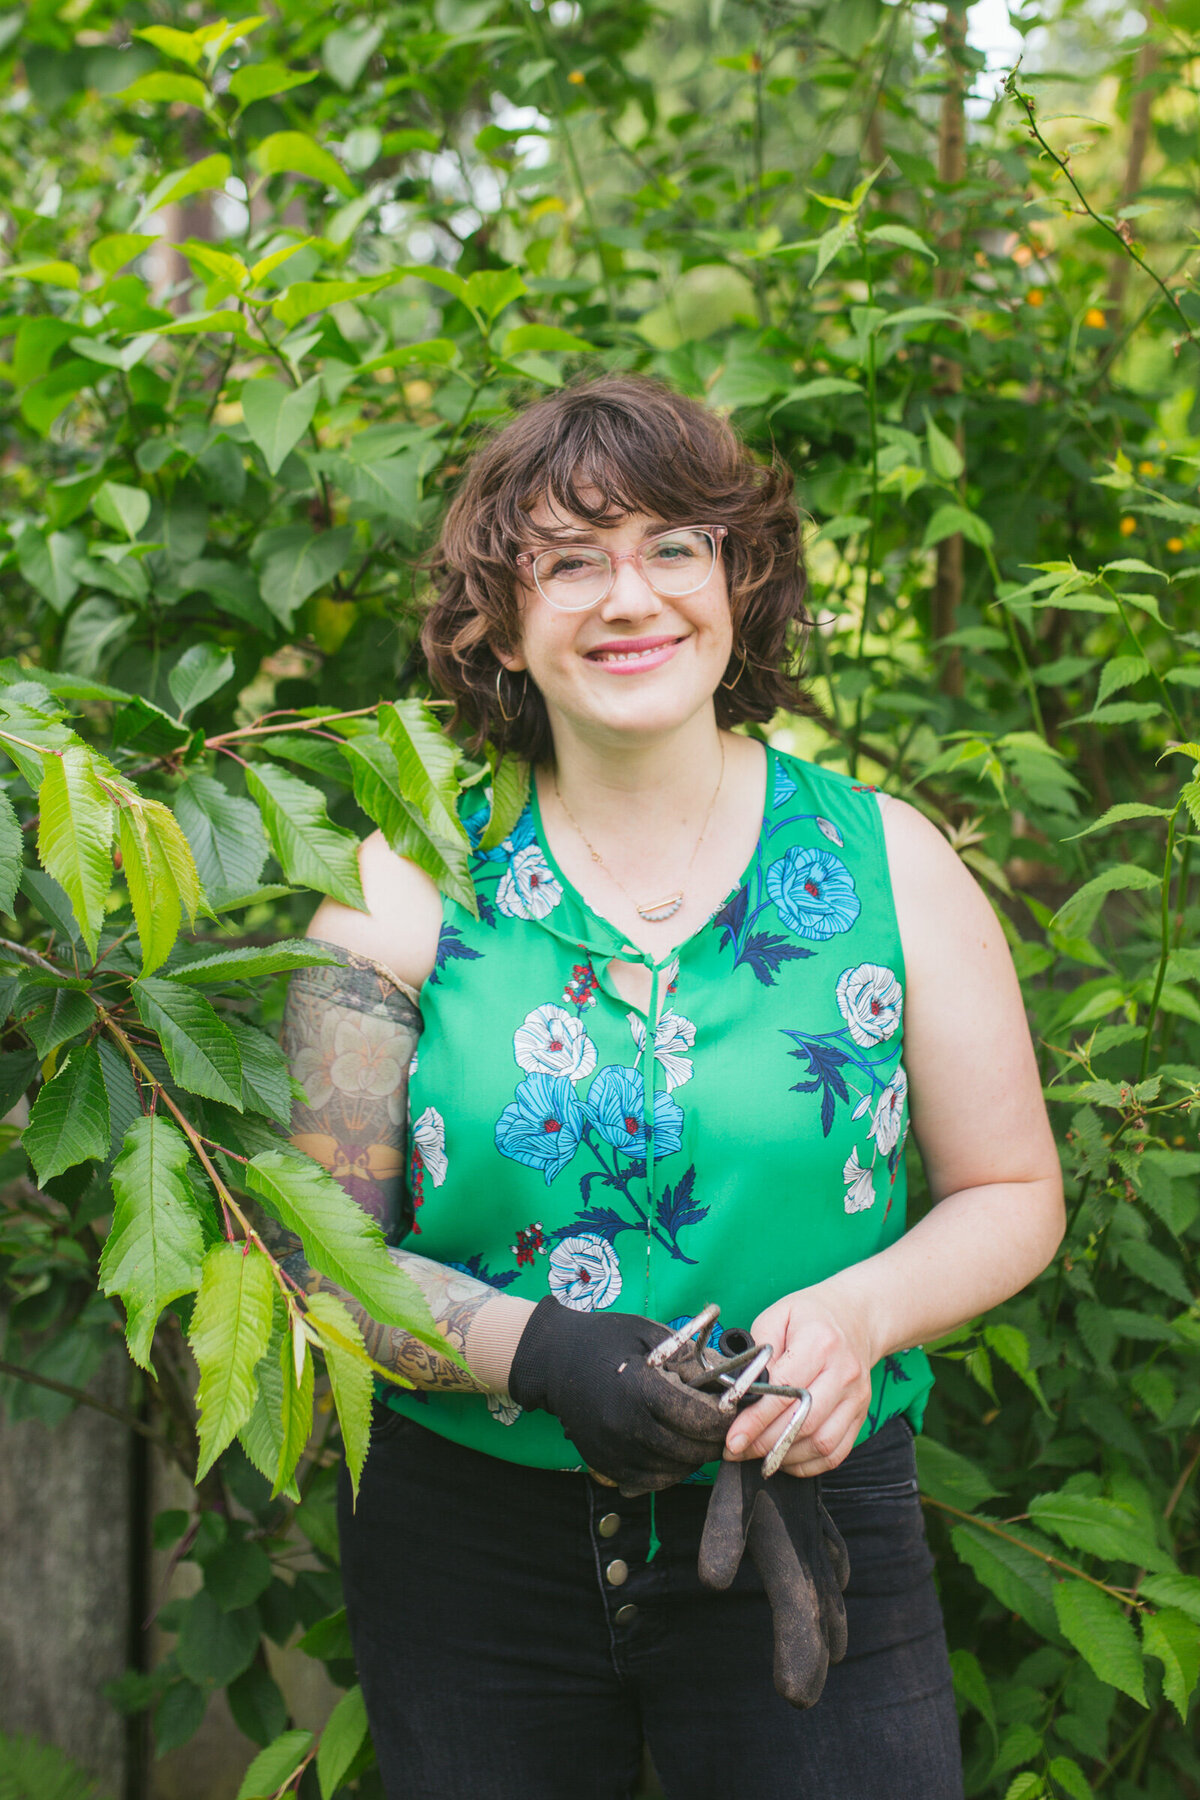 A woman standing next to bushes with her gardening gloves on.